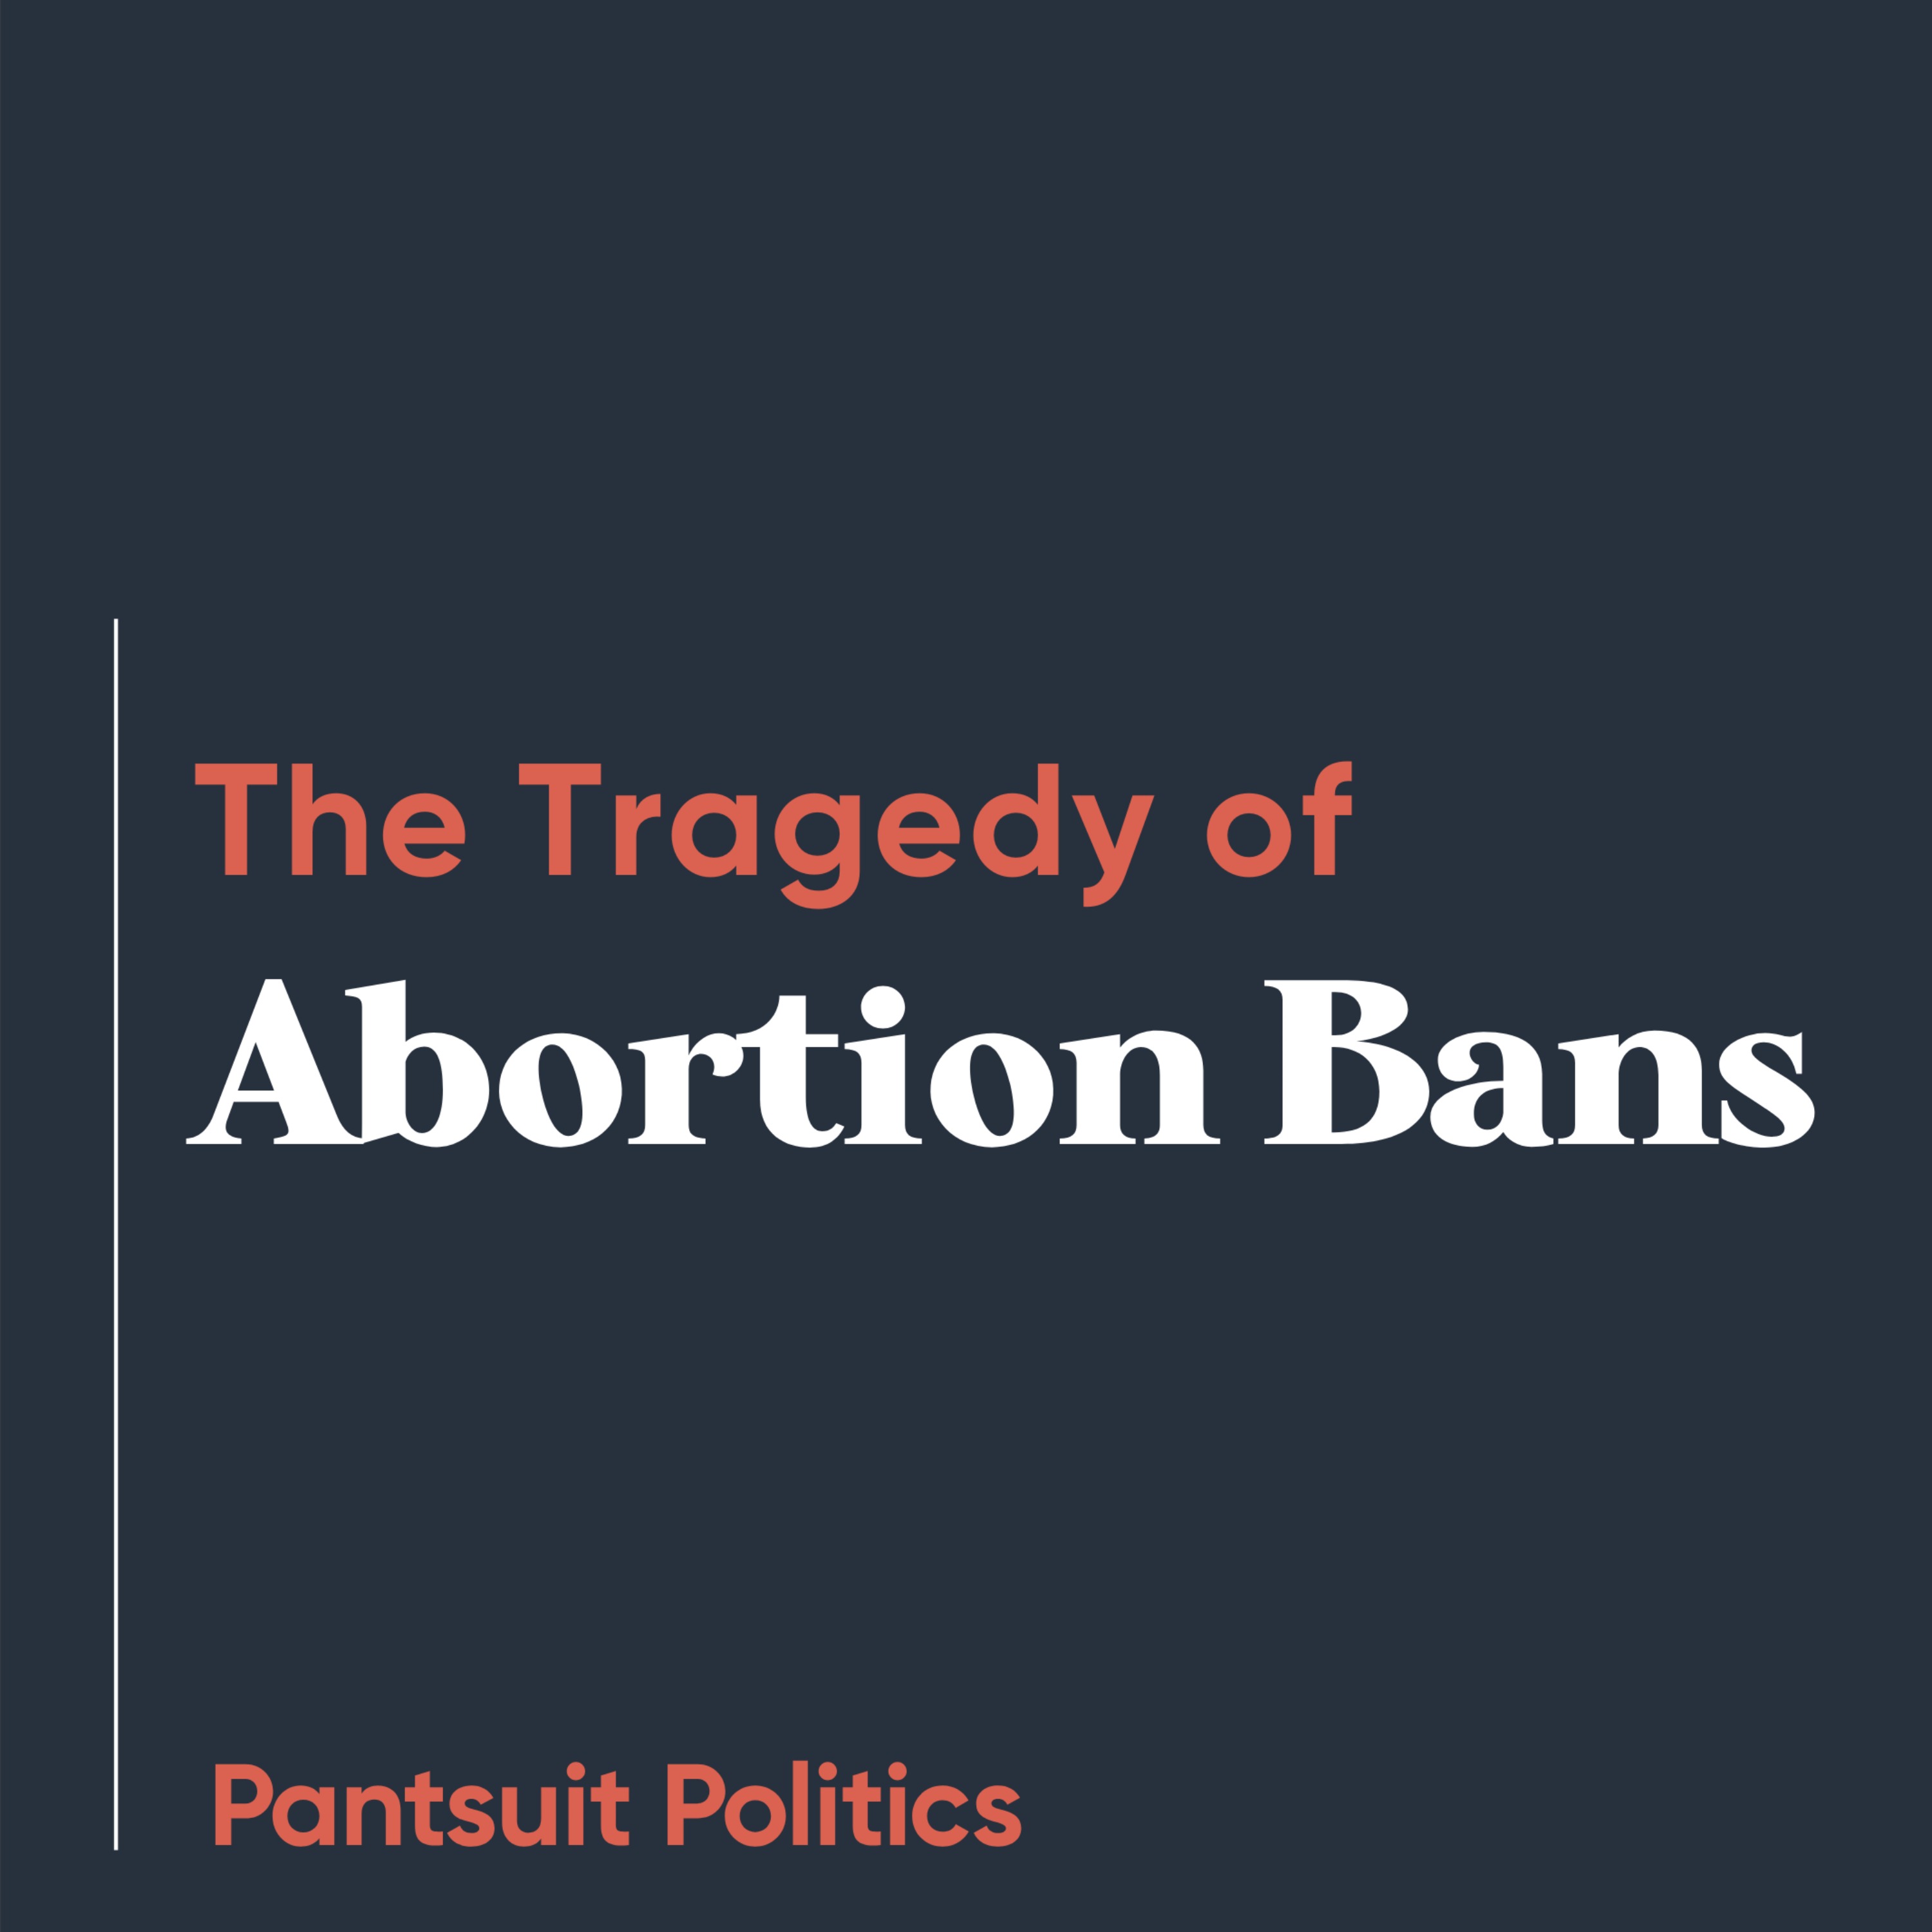 The Tragedy of Abortion Bans